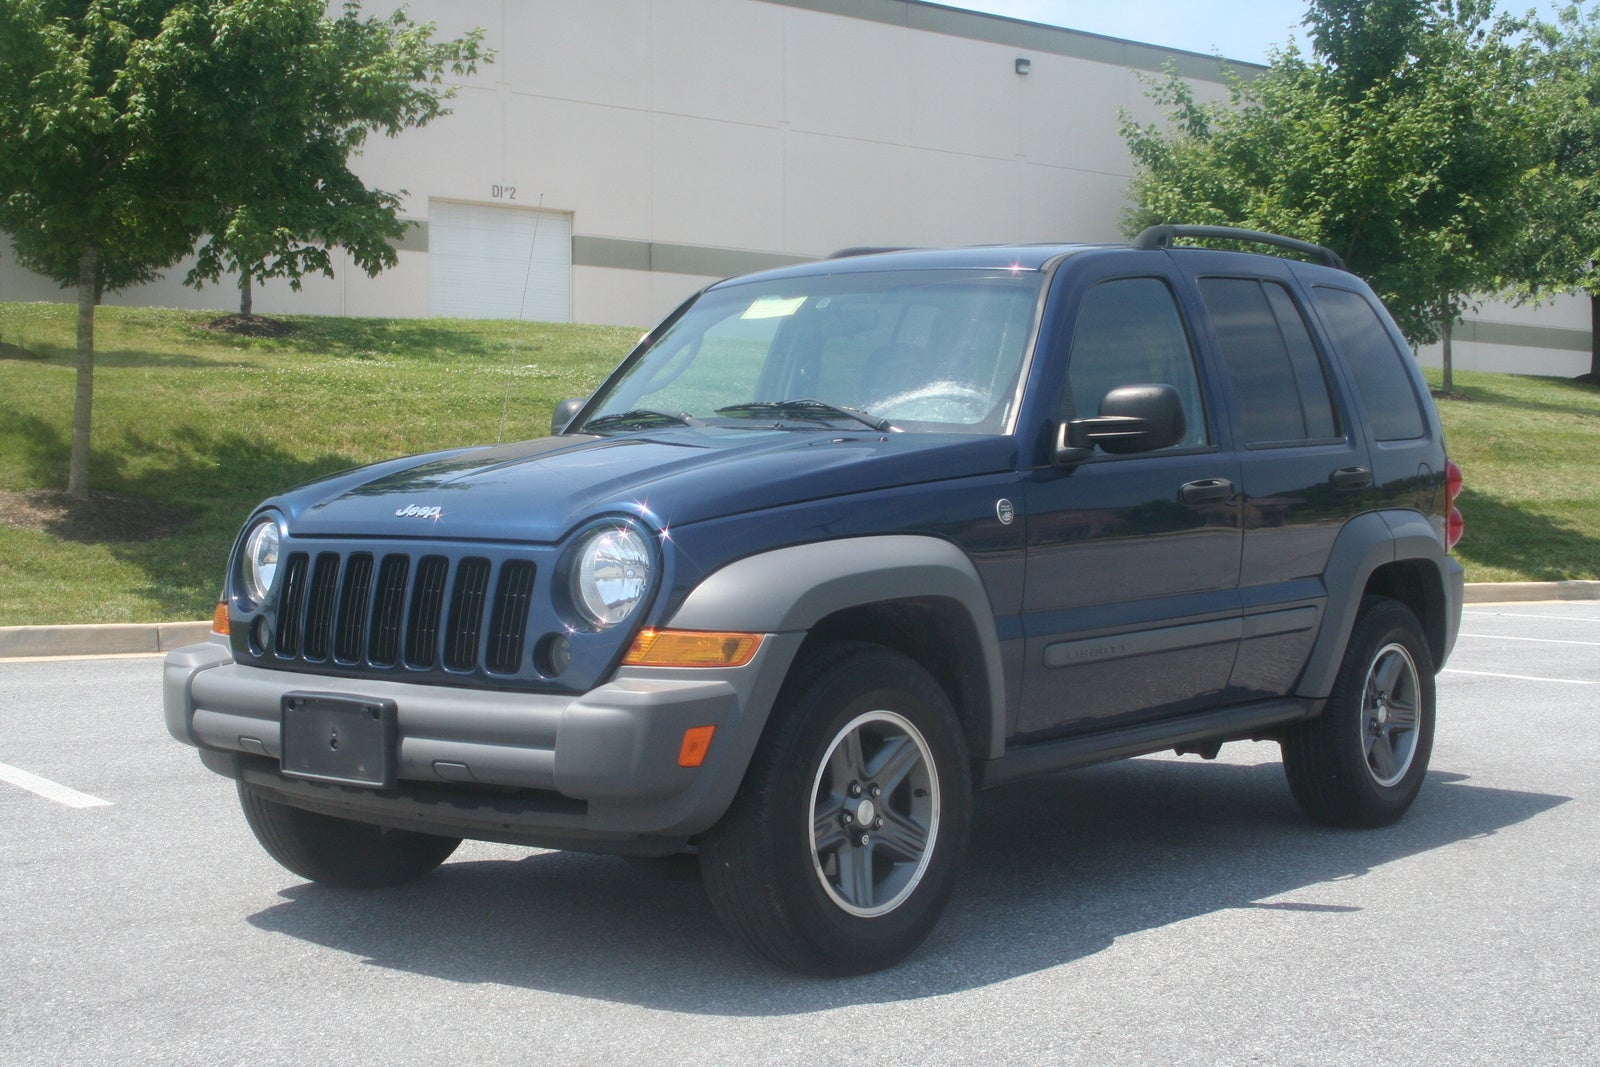 2005 Jeep liberty limited reviews #2